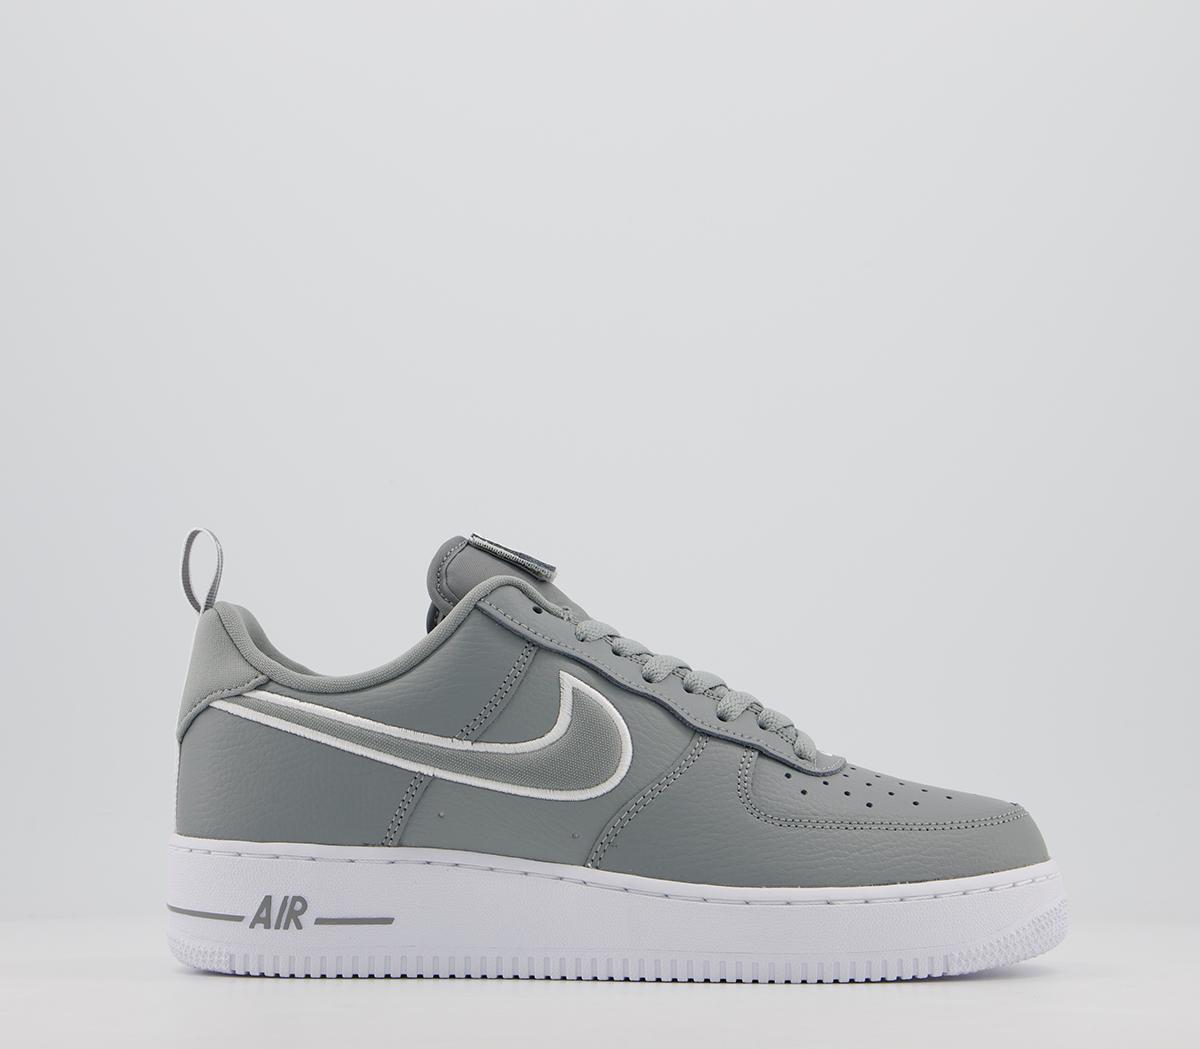 NikeAir Force 1 07 TrainersTracksuit Pack Grey